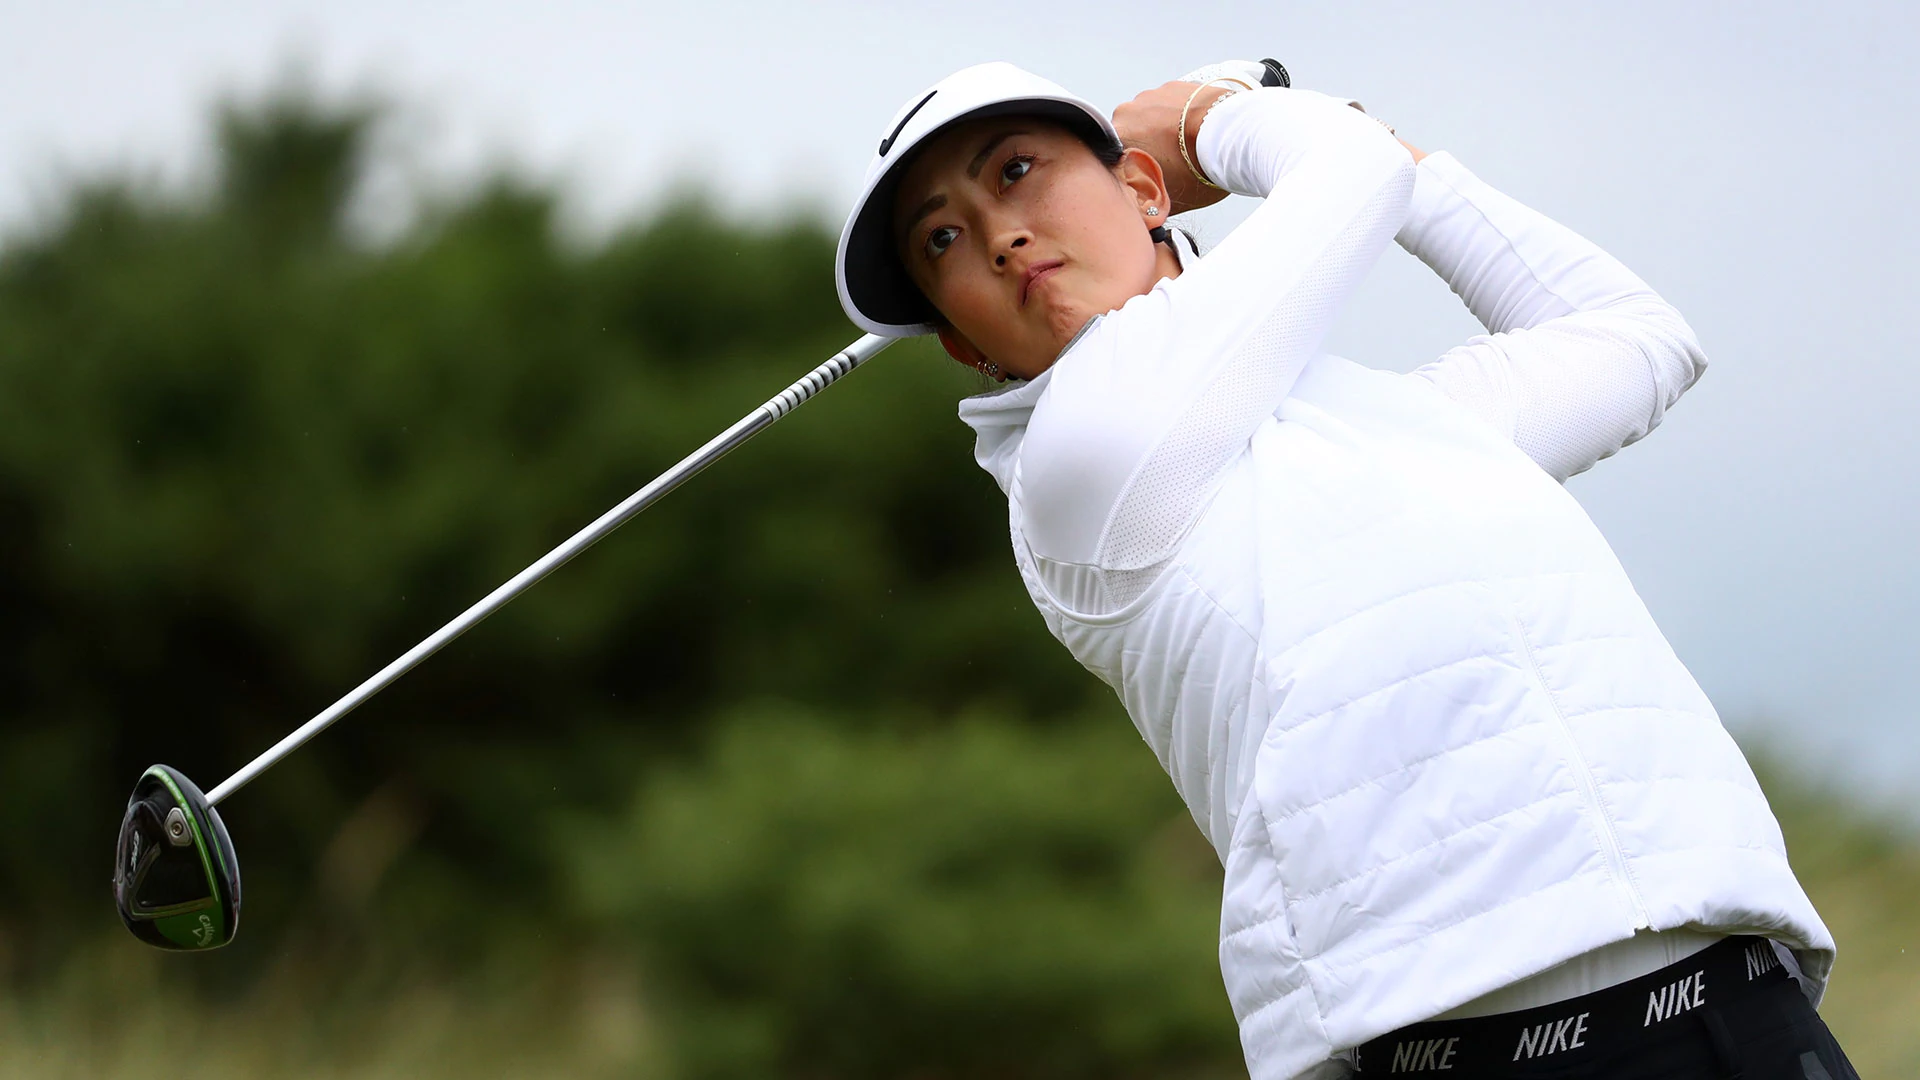 Wie returns to action following appendectomy